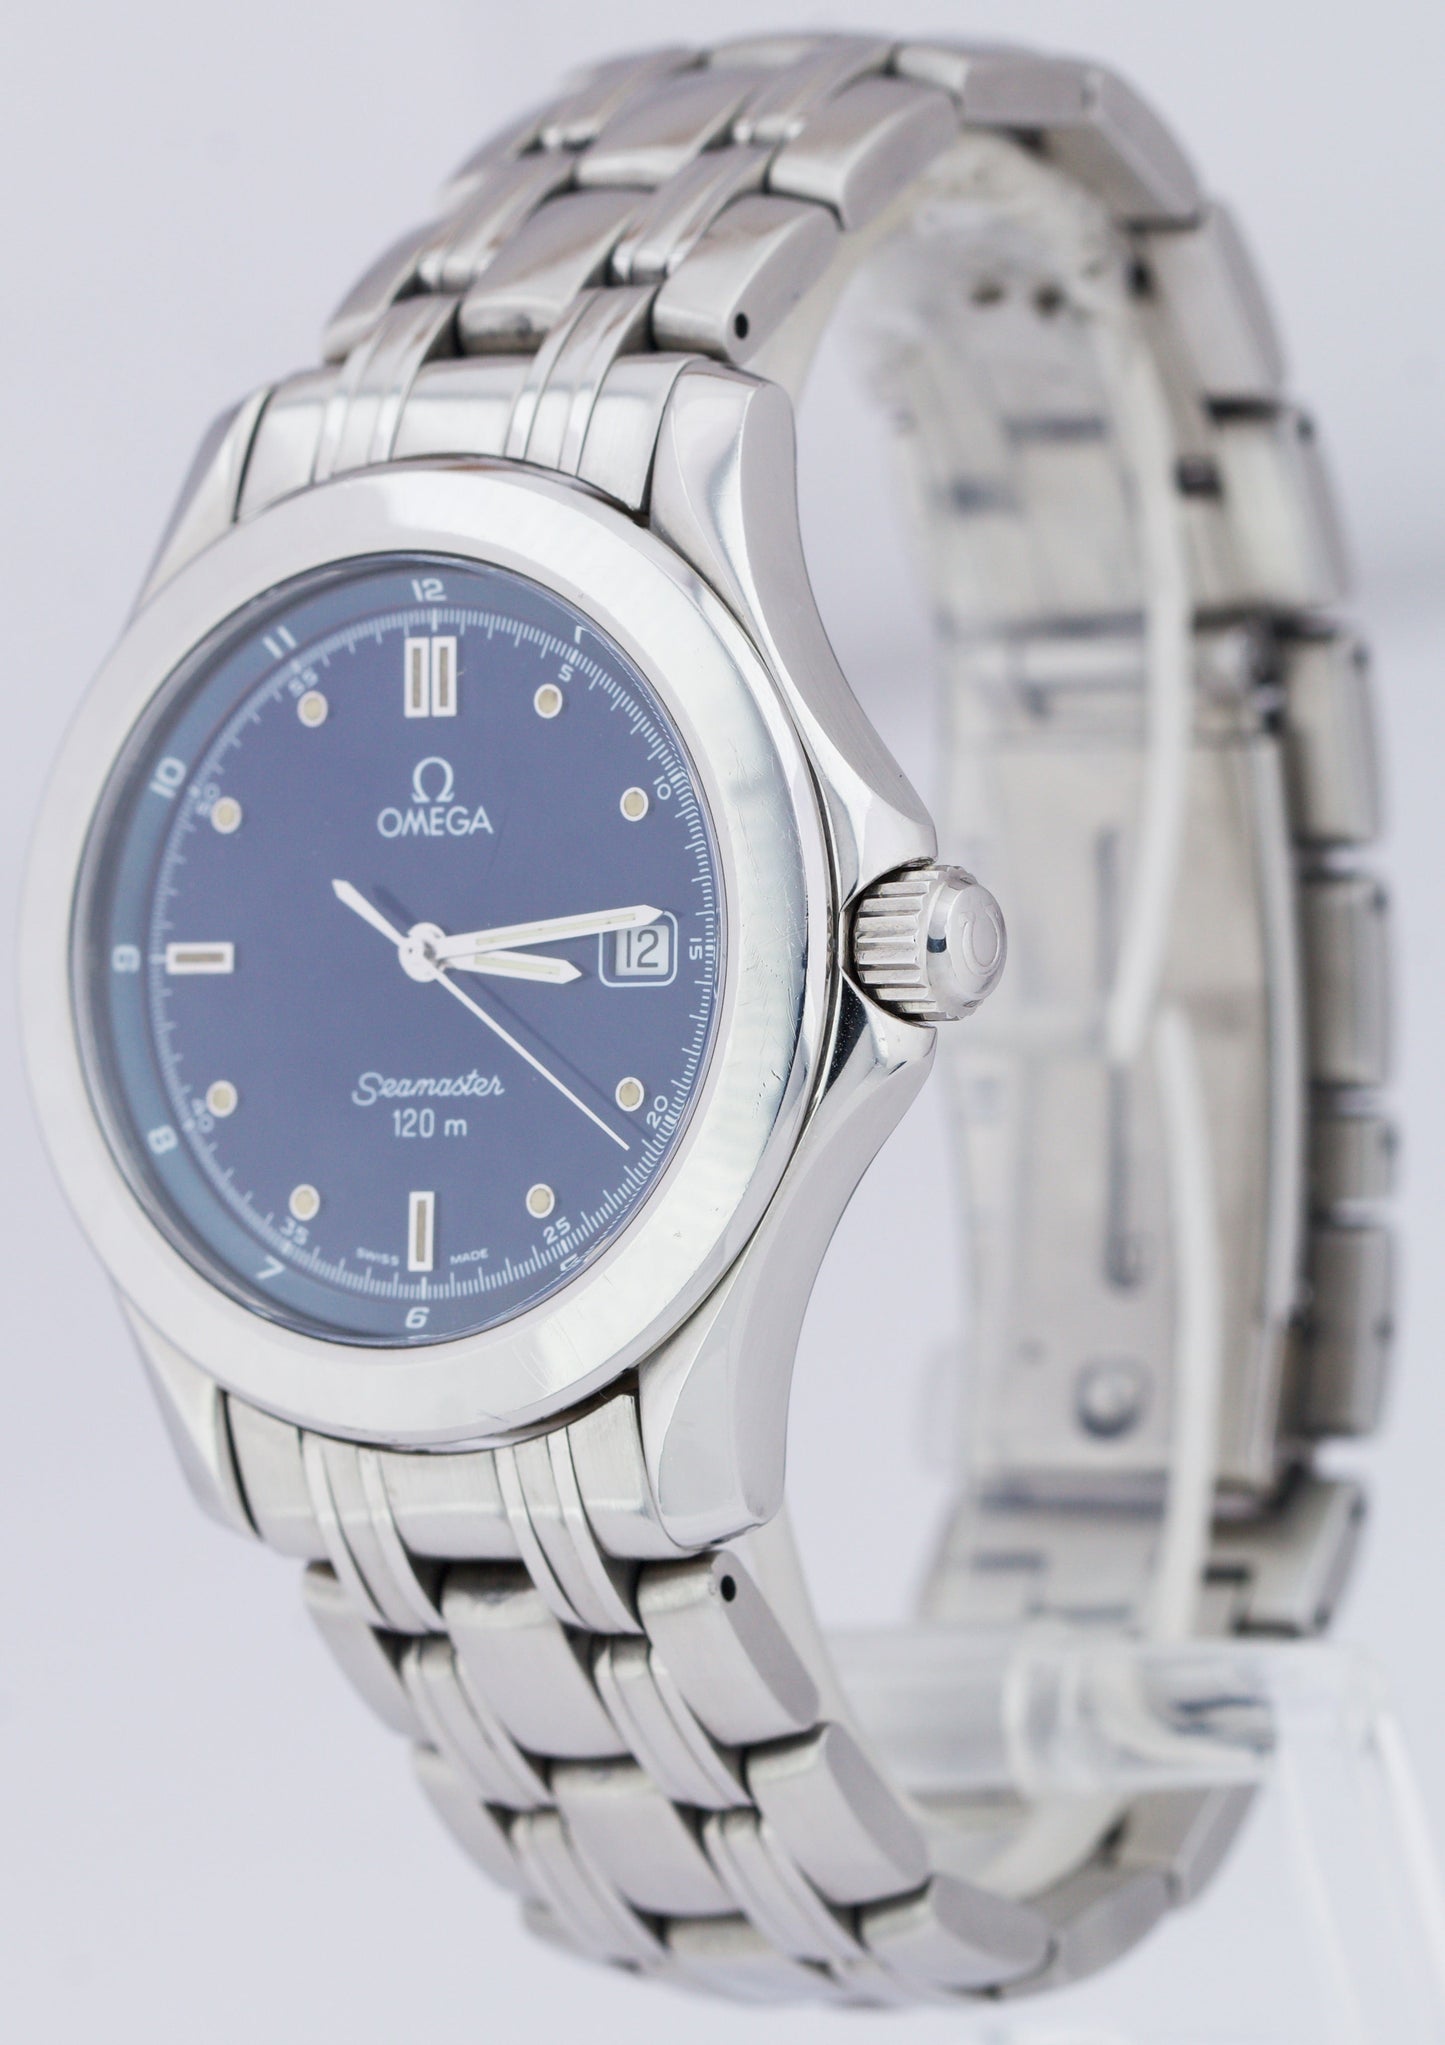 Omega Seamaster 120m BLUE DIAL Swiss Quartz Stainless Steel 36mm Watch 2511.80